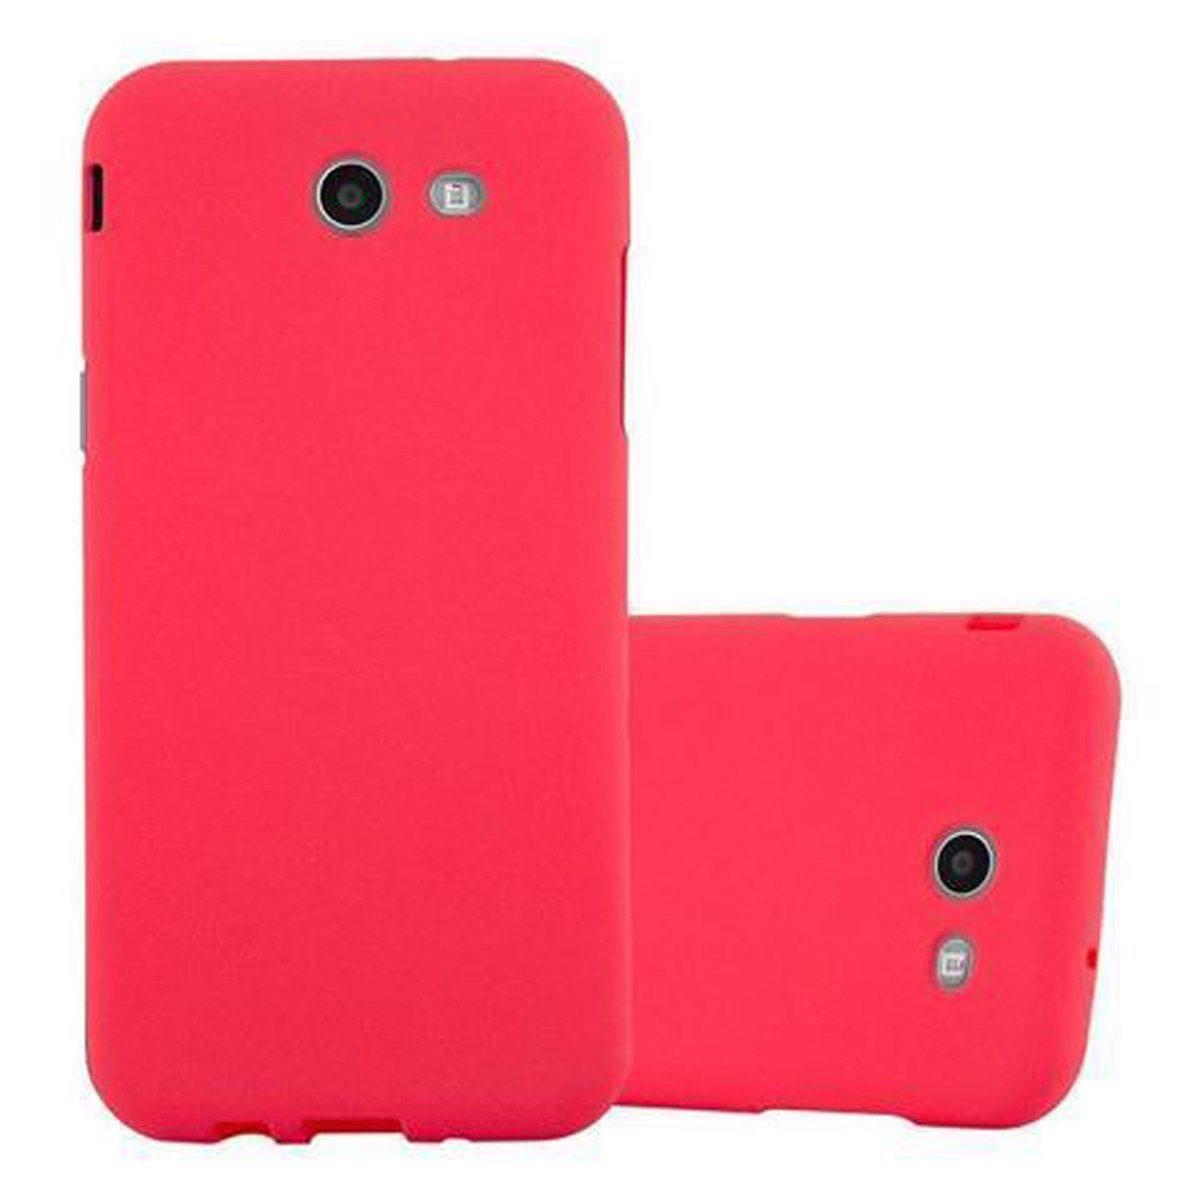 Backcover, CADORABO Version, Frosted TPU US J3 Galaxy Schutzhülle, ROT FROST 2017 Samsung,